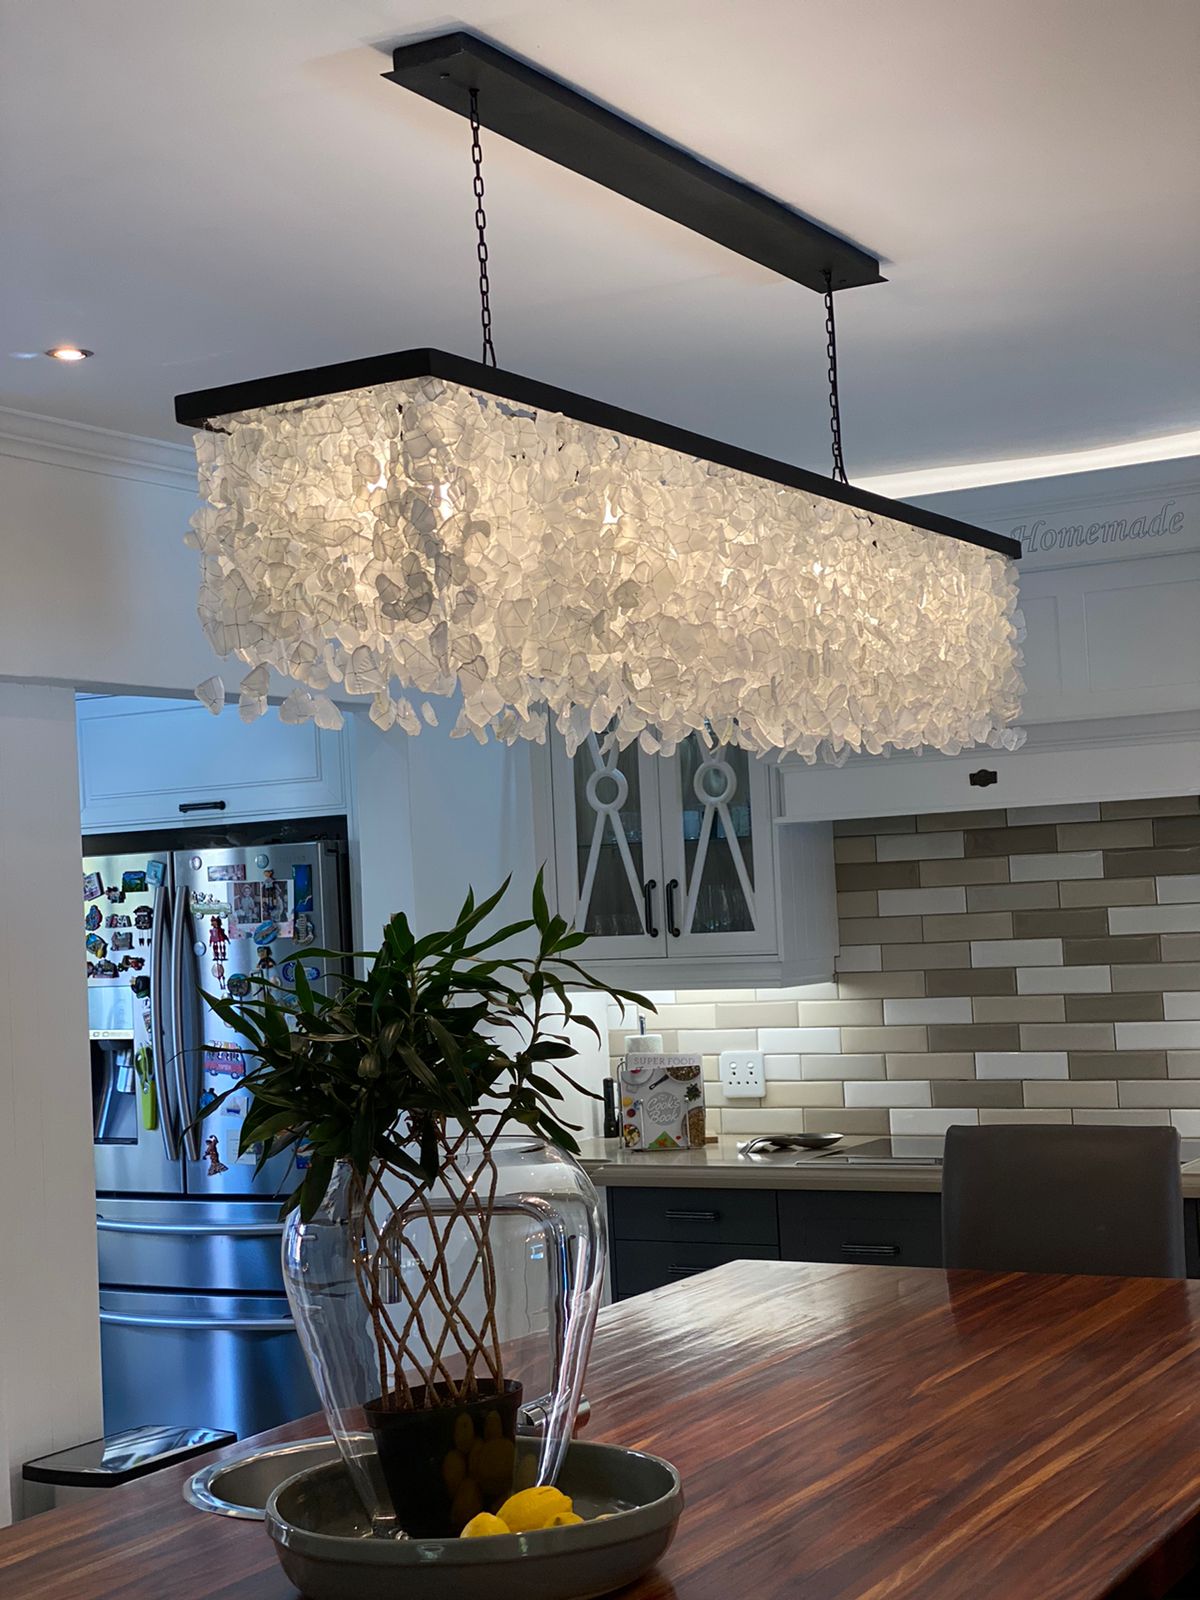 Lighting_Recycled_Glass_Linear_Chandelier_White_Black